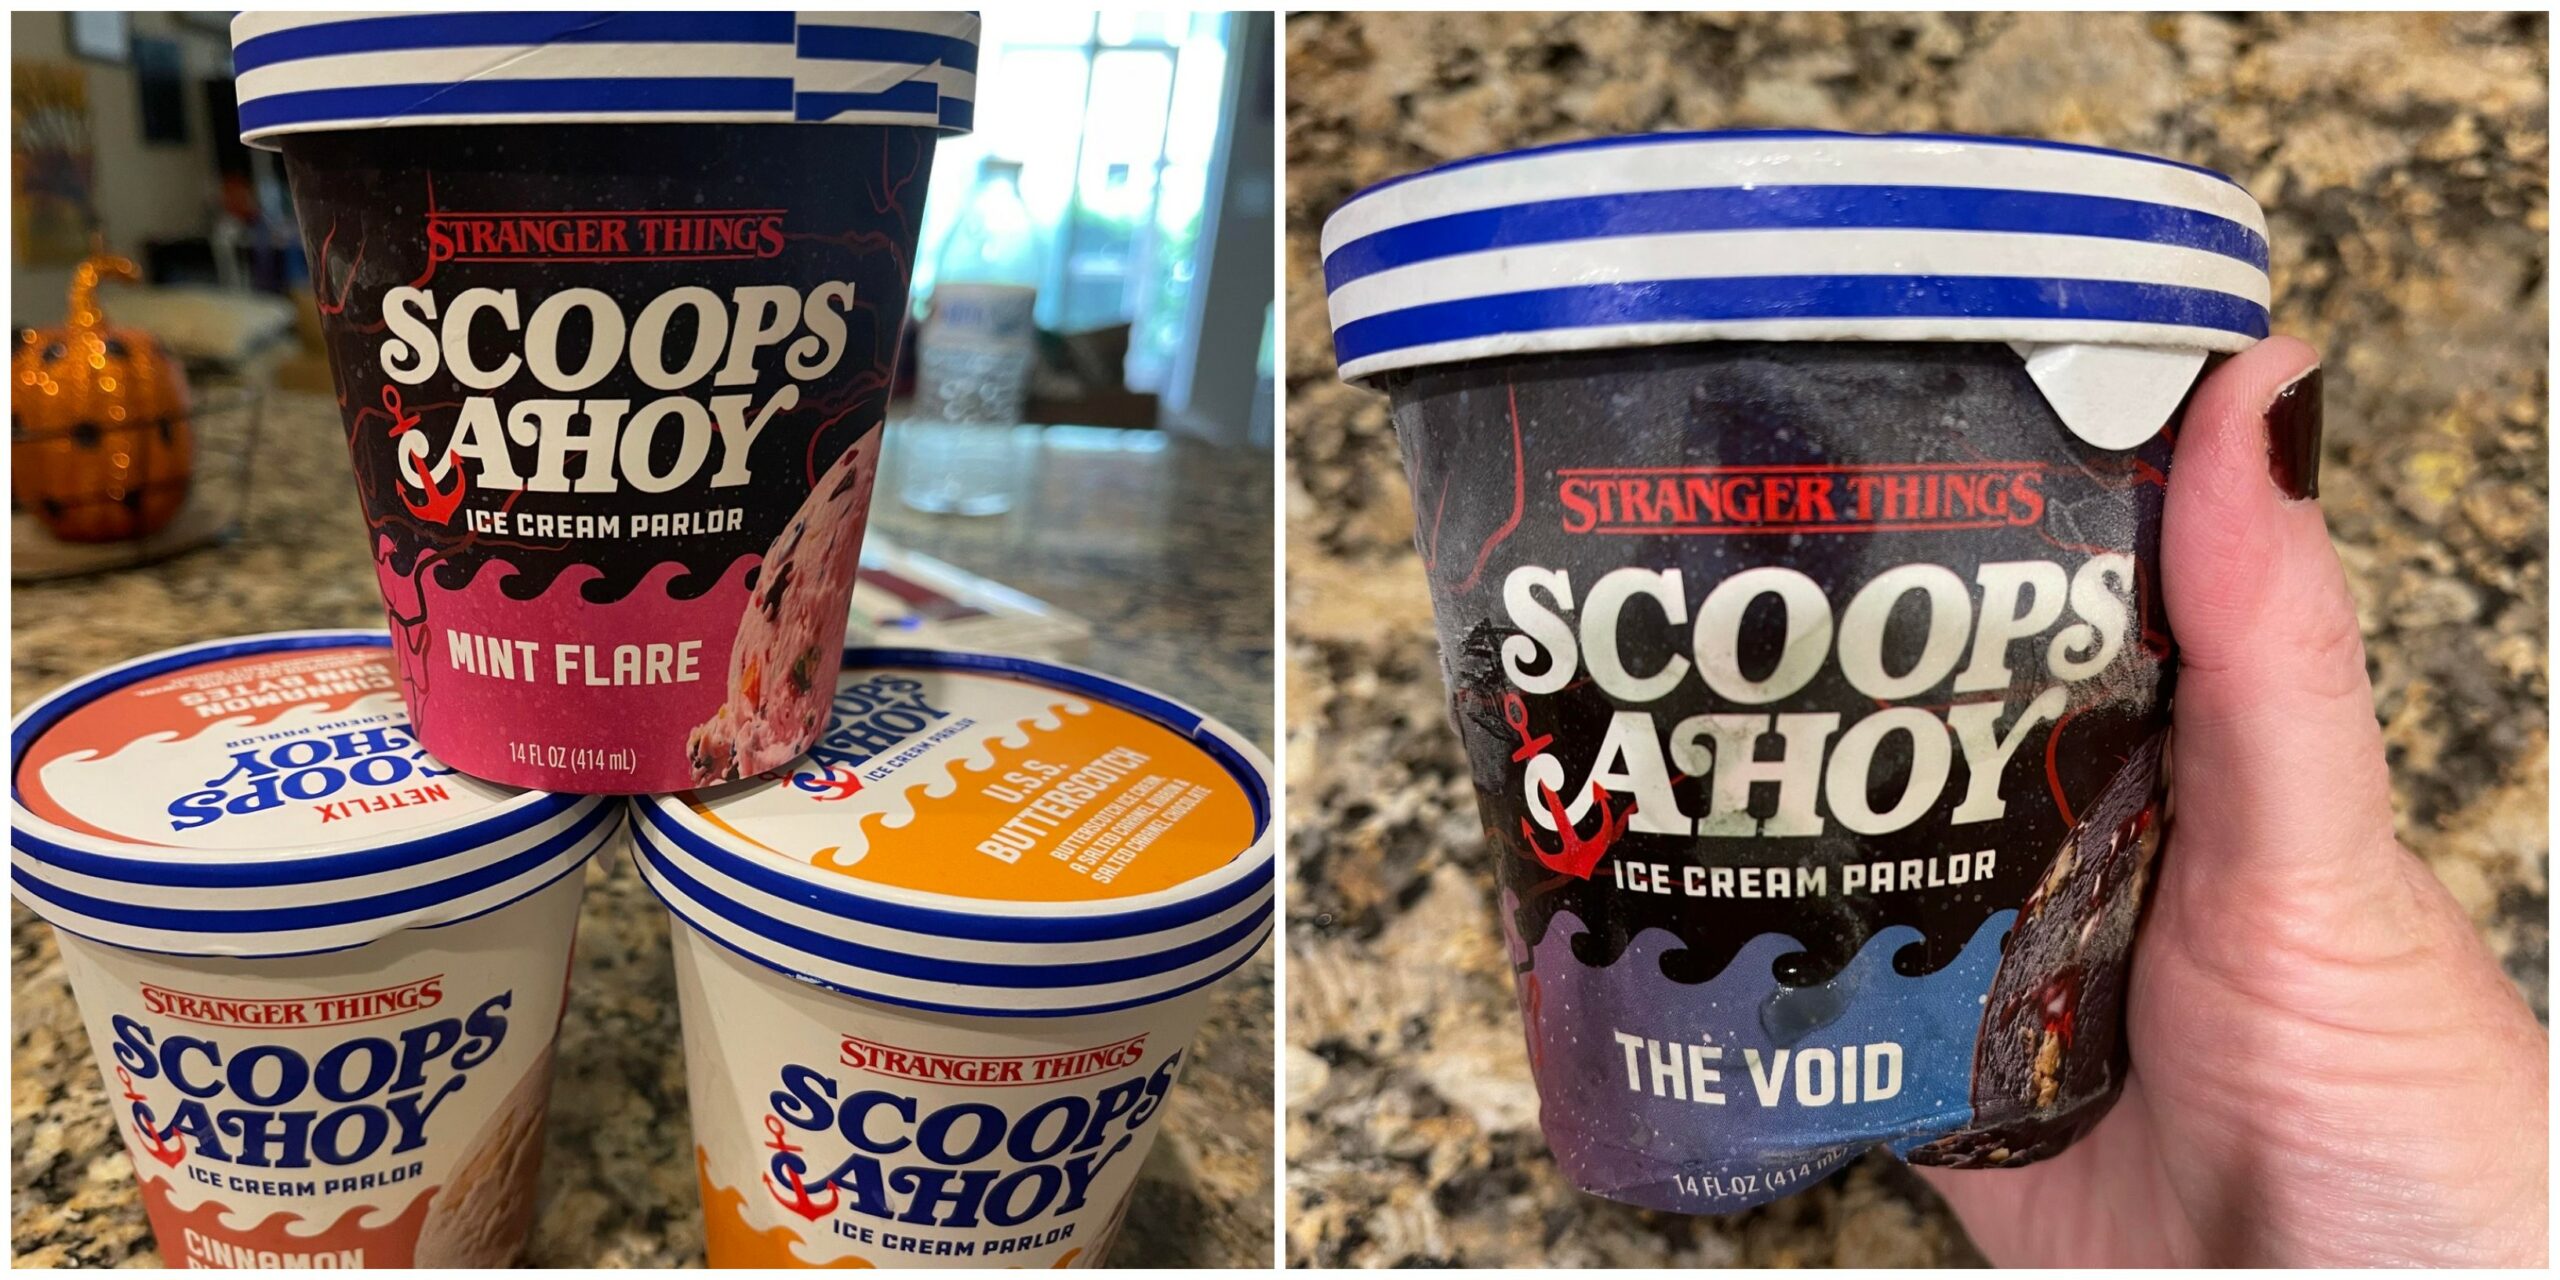 Would you like to set sail on this ocean of flavor with me? - Scoops Ahoy Ice Cream Now Available